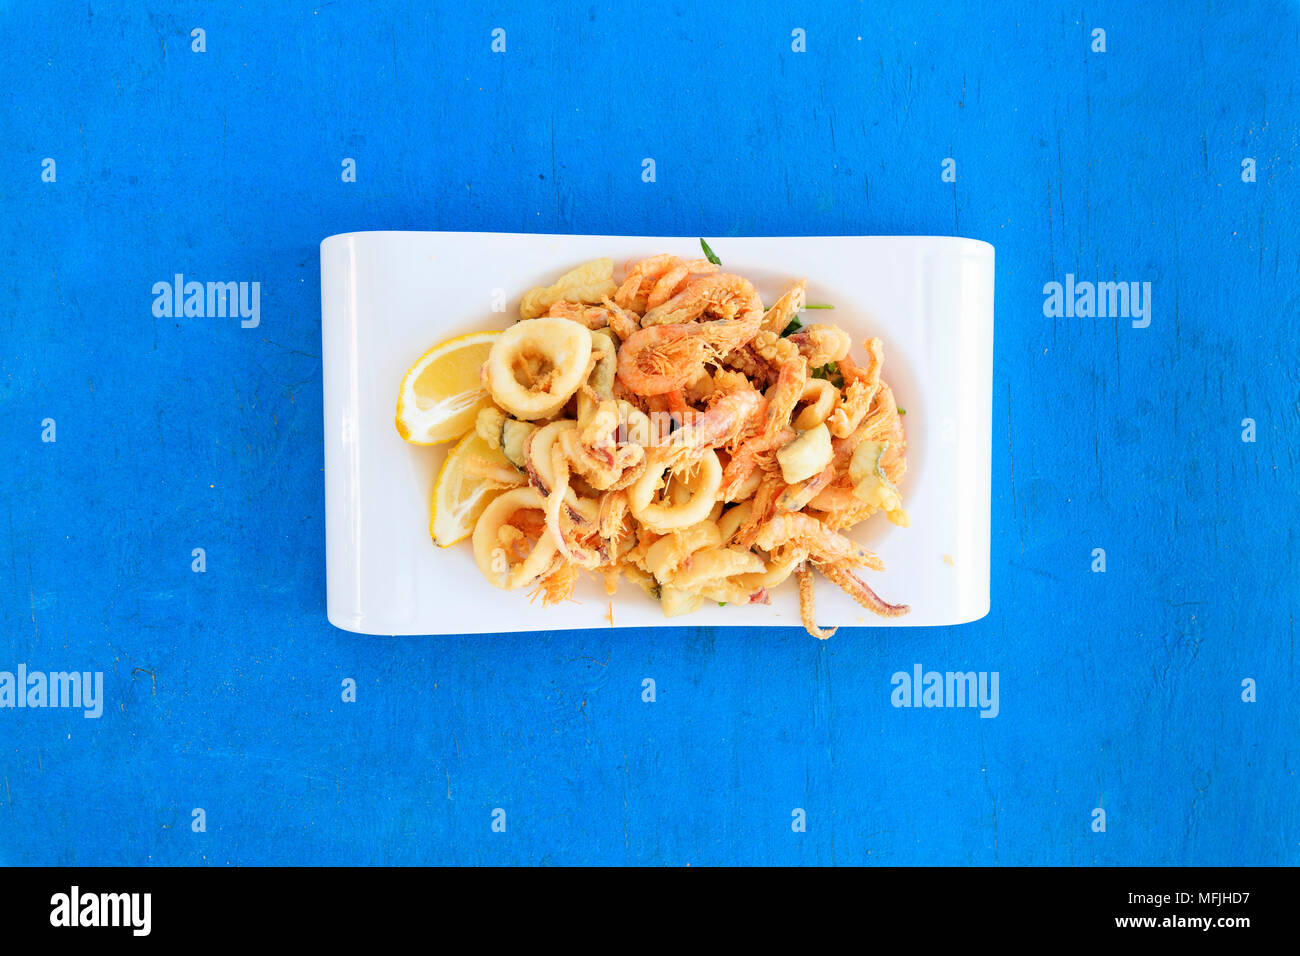 Fried seafood on platter, Sicily, Italy, Europe Stock Photo